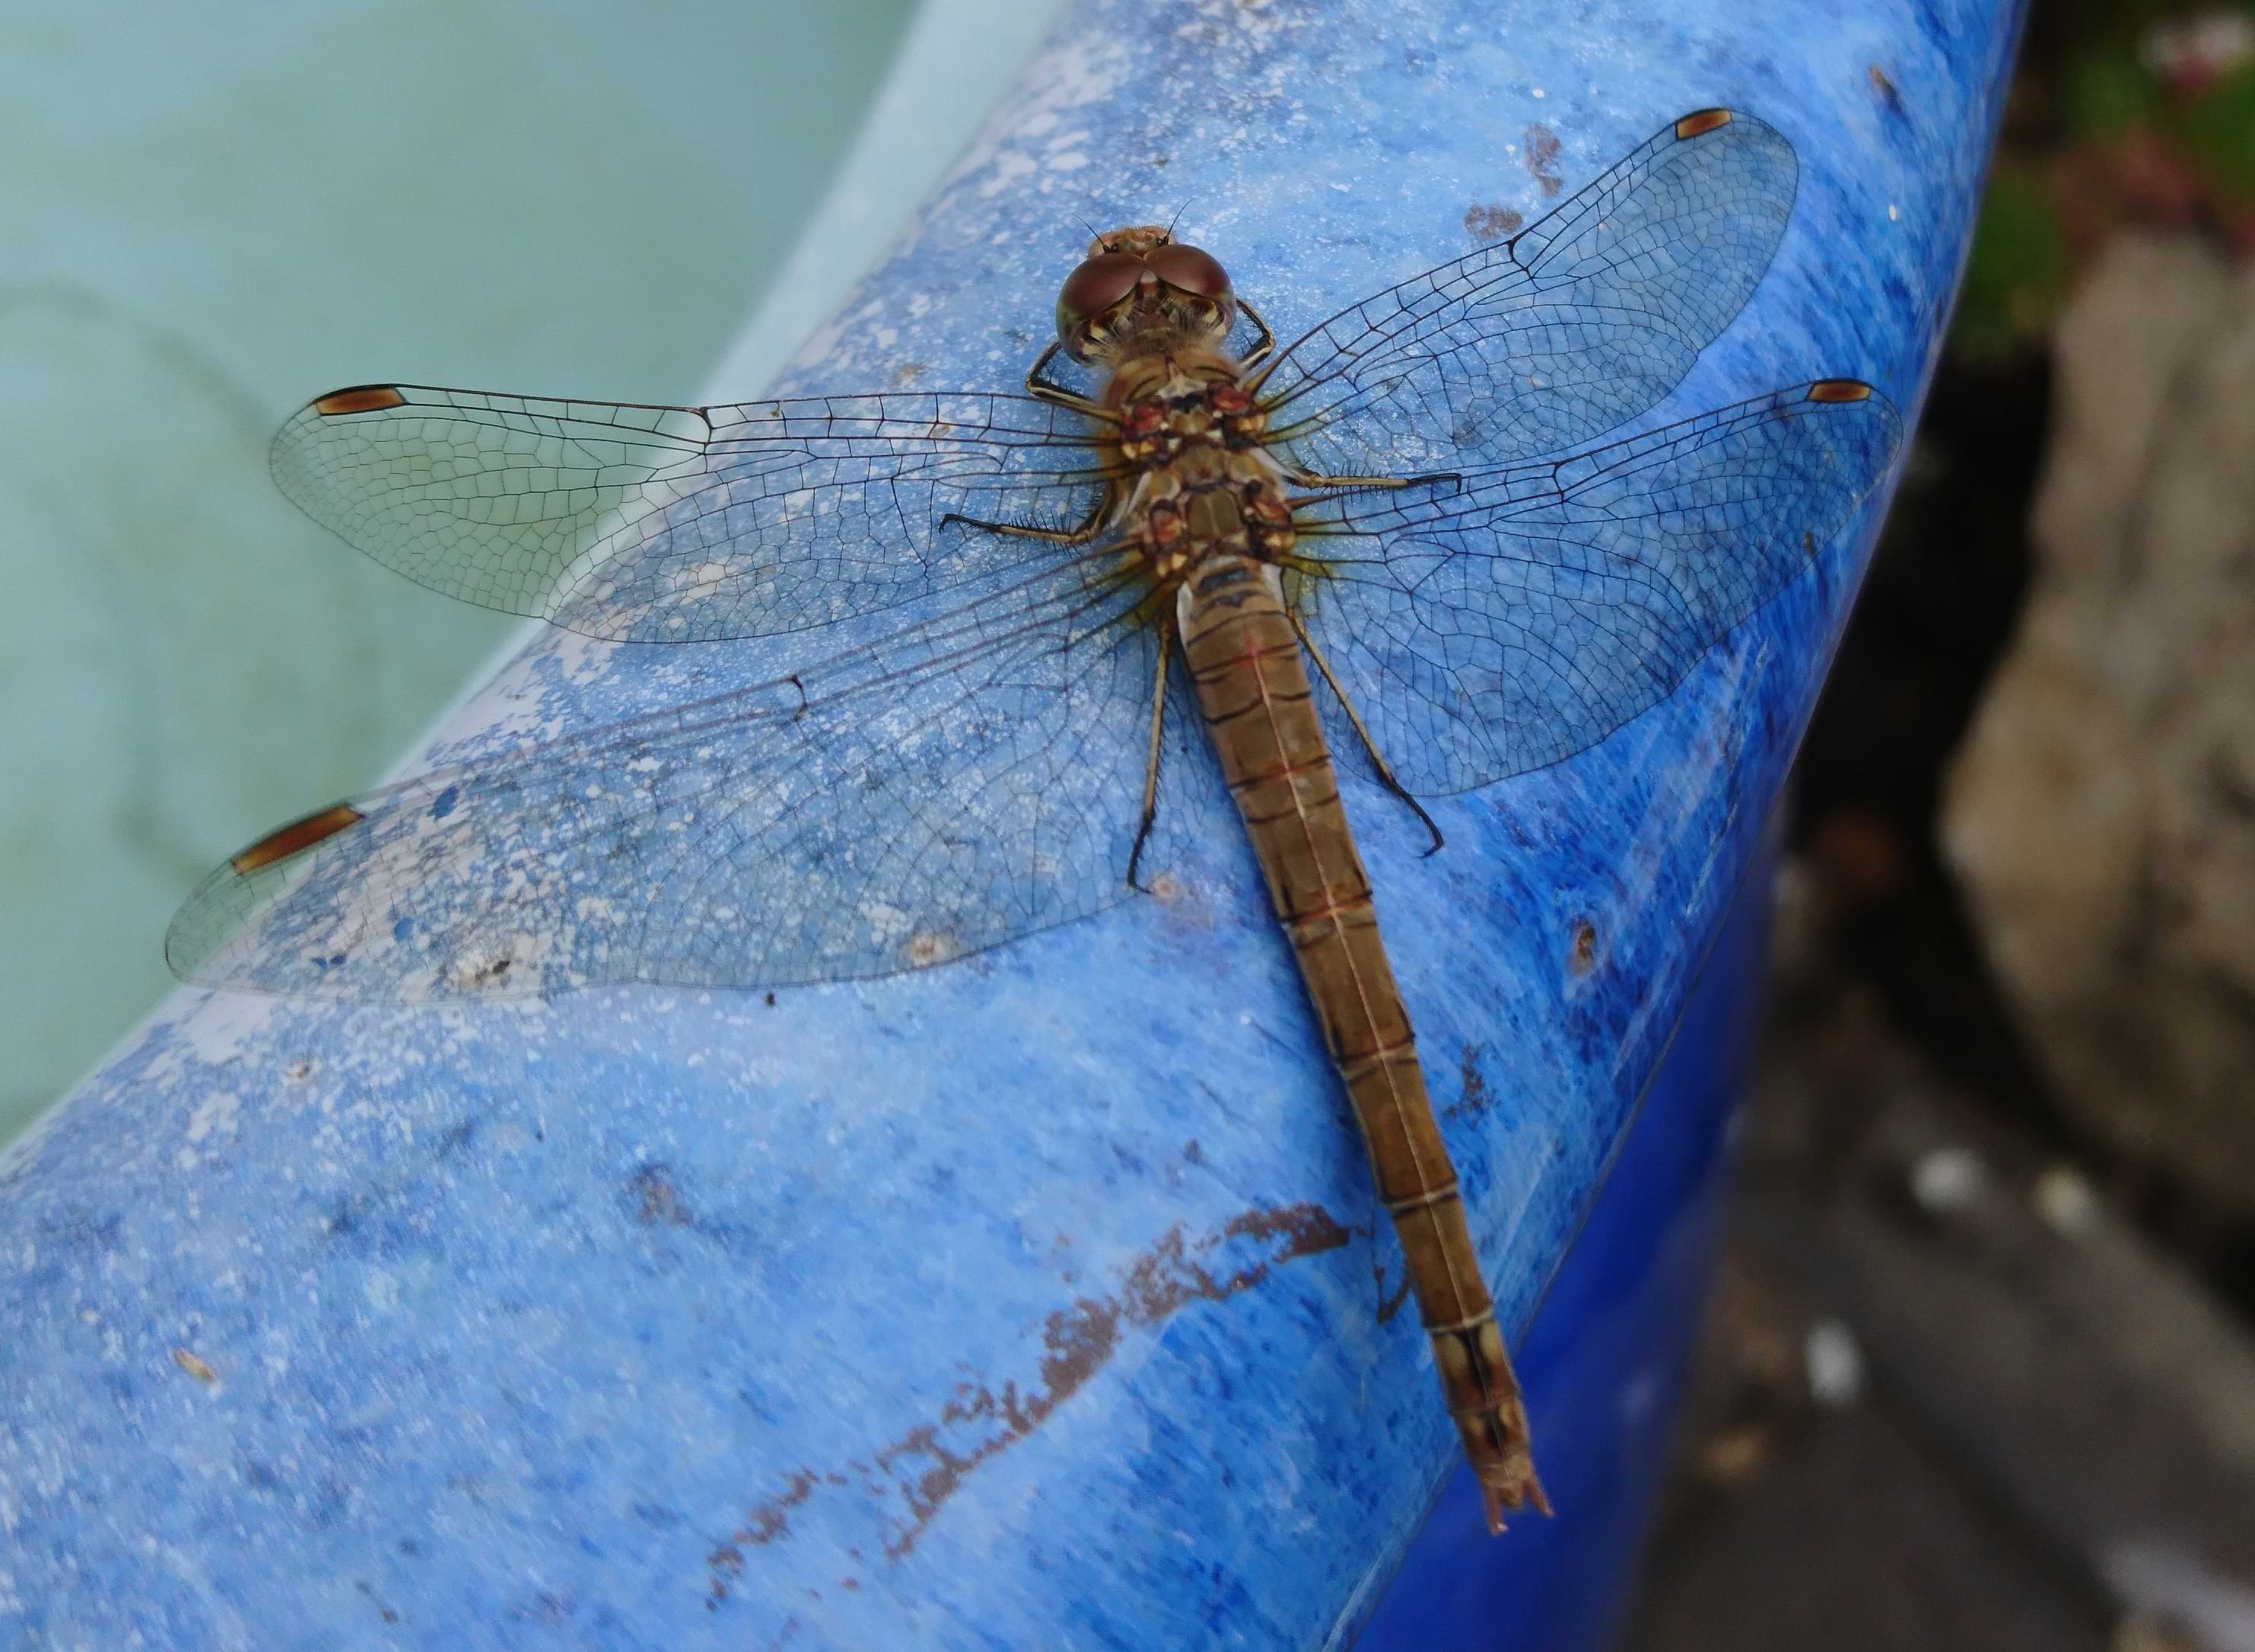 Photo of a brown dragonfly sitting on the rim of a blue bowl. Its thorax has a few patches of light yellow on the top and has fine hairs where it connects to the dragonfly's head. Its legs are spikey and have pale stripes running down them, and its abdomen is scored with dark black lines, bands of pale yellow, and a seam running down the middle. The dragonfly has four long and intricate wings that are spread out across the bowl. The wings are mostly transparent apart from the tips which have a light brown colouration resembling stained glass.